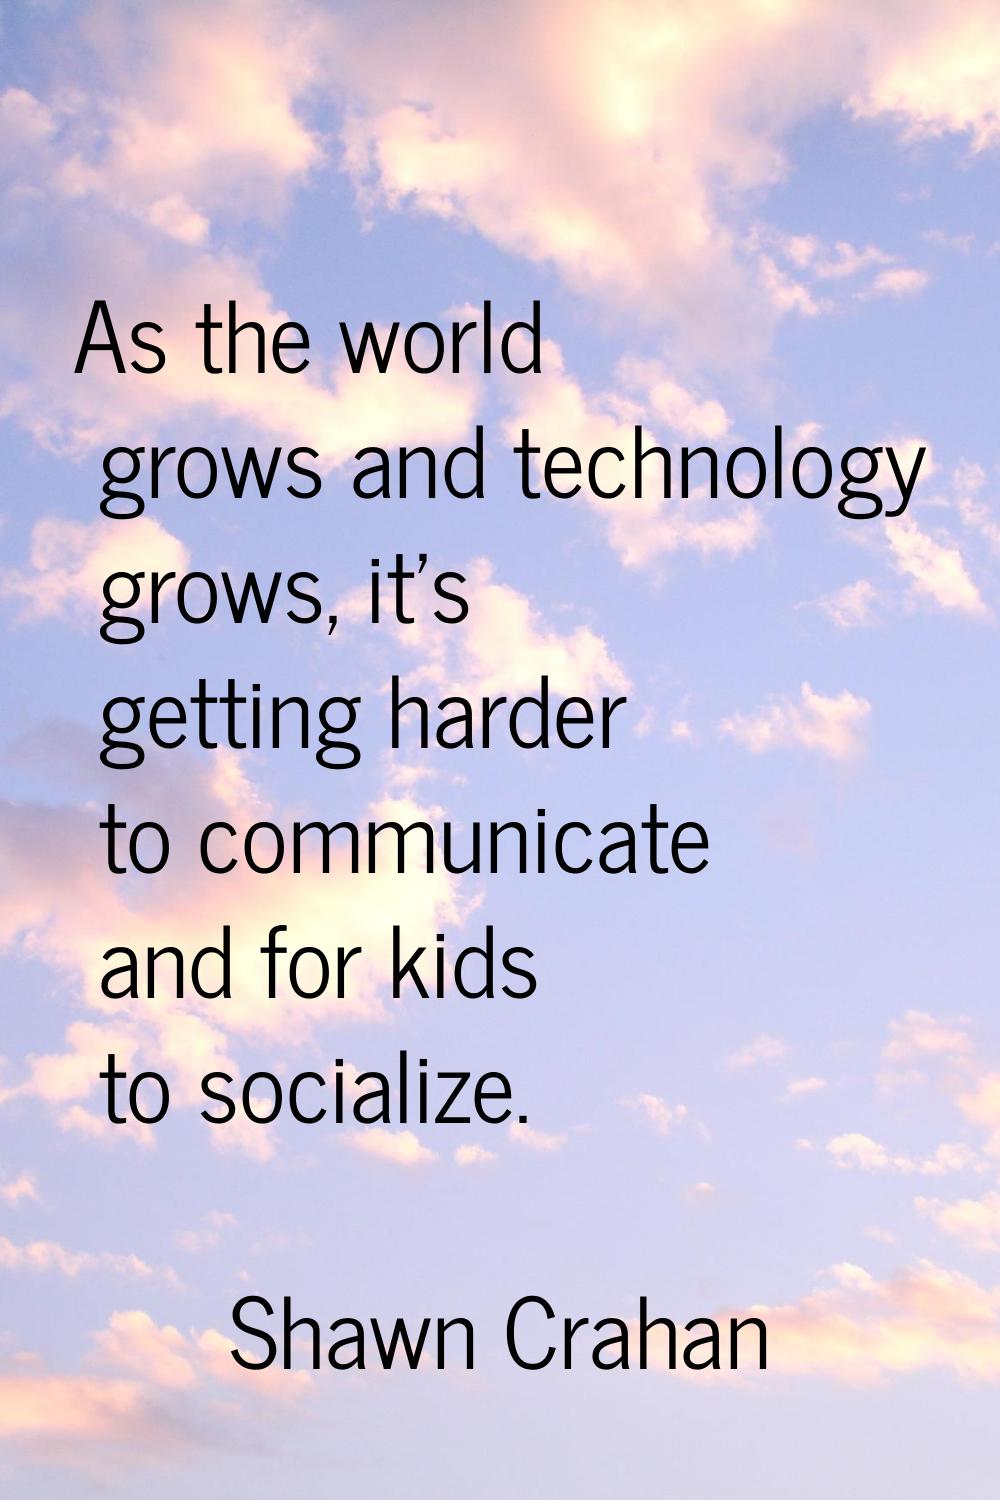 As the world grows and technology grows, it's getting harder to communicate and for kids to sociali